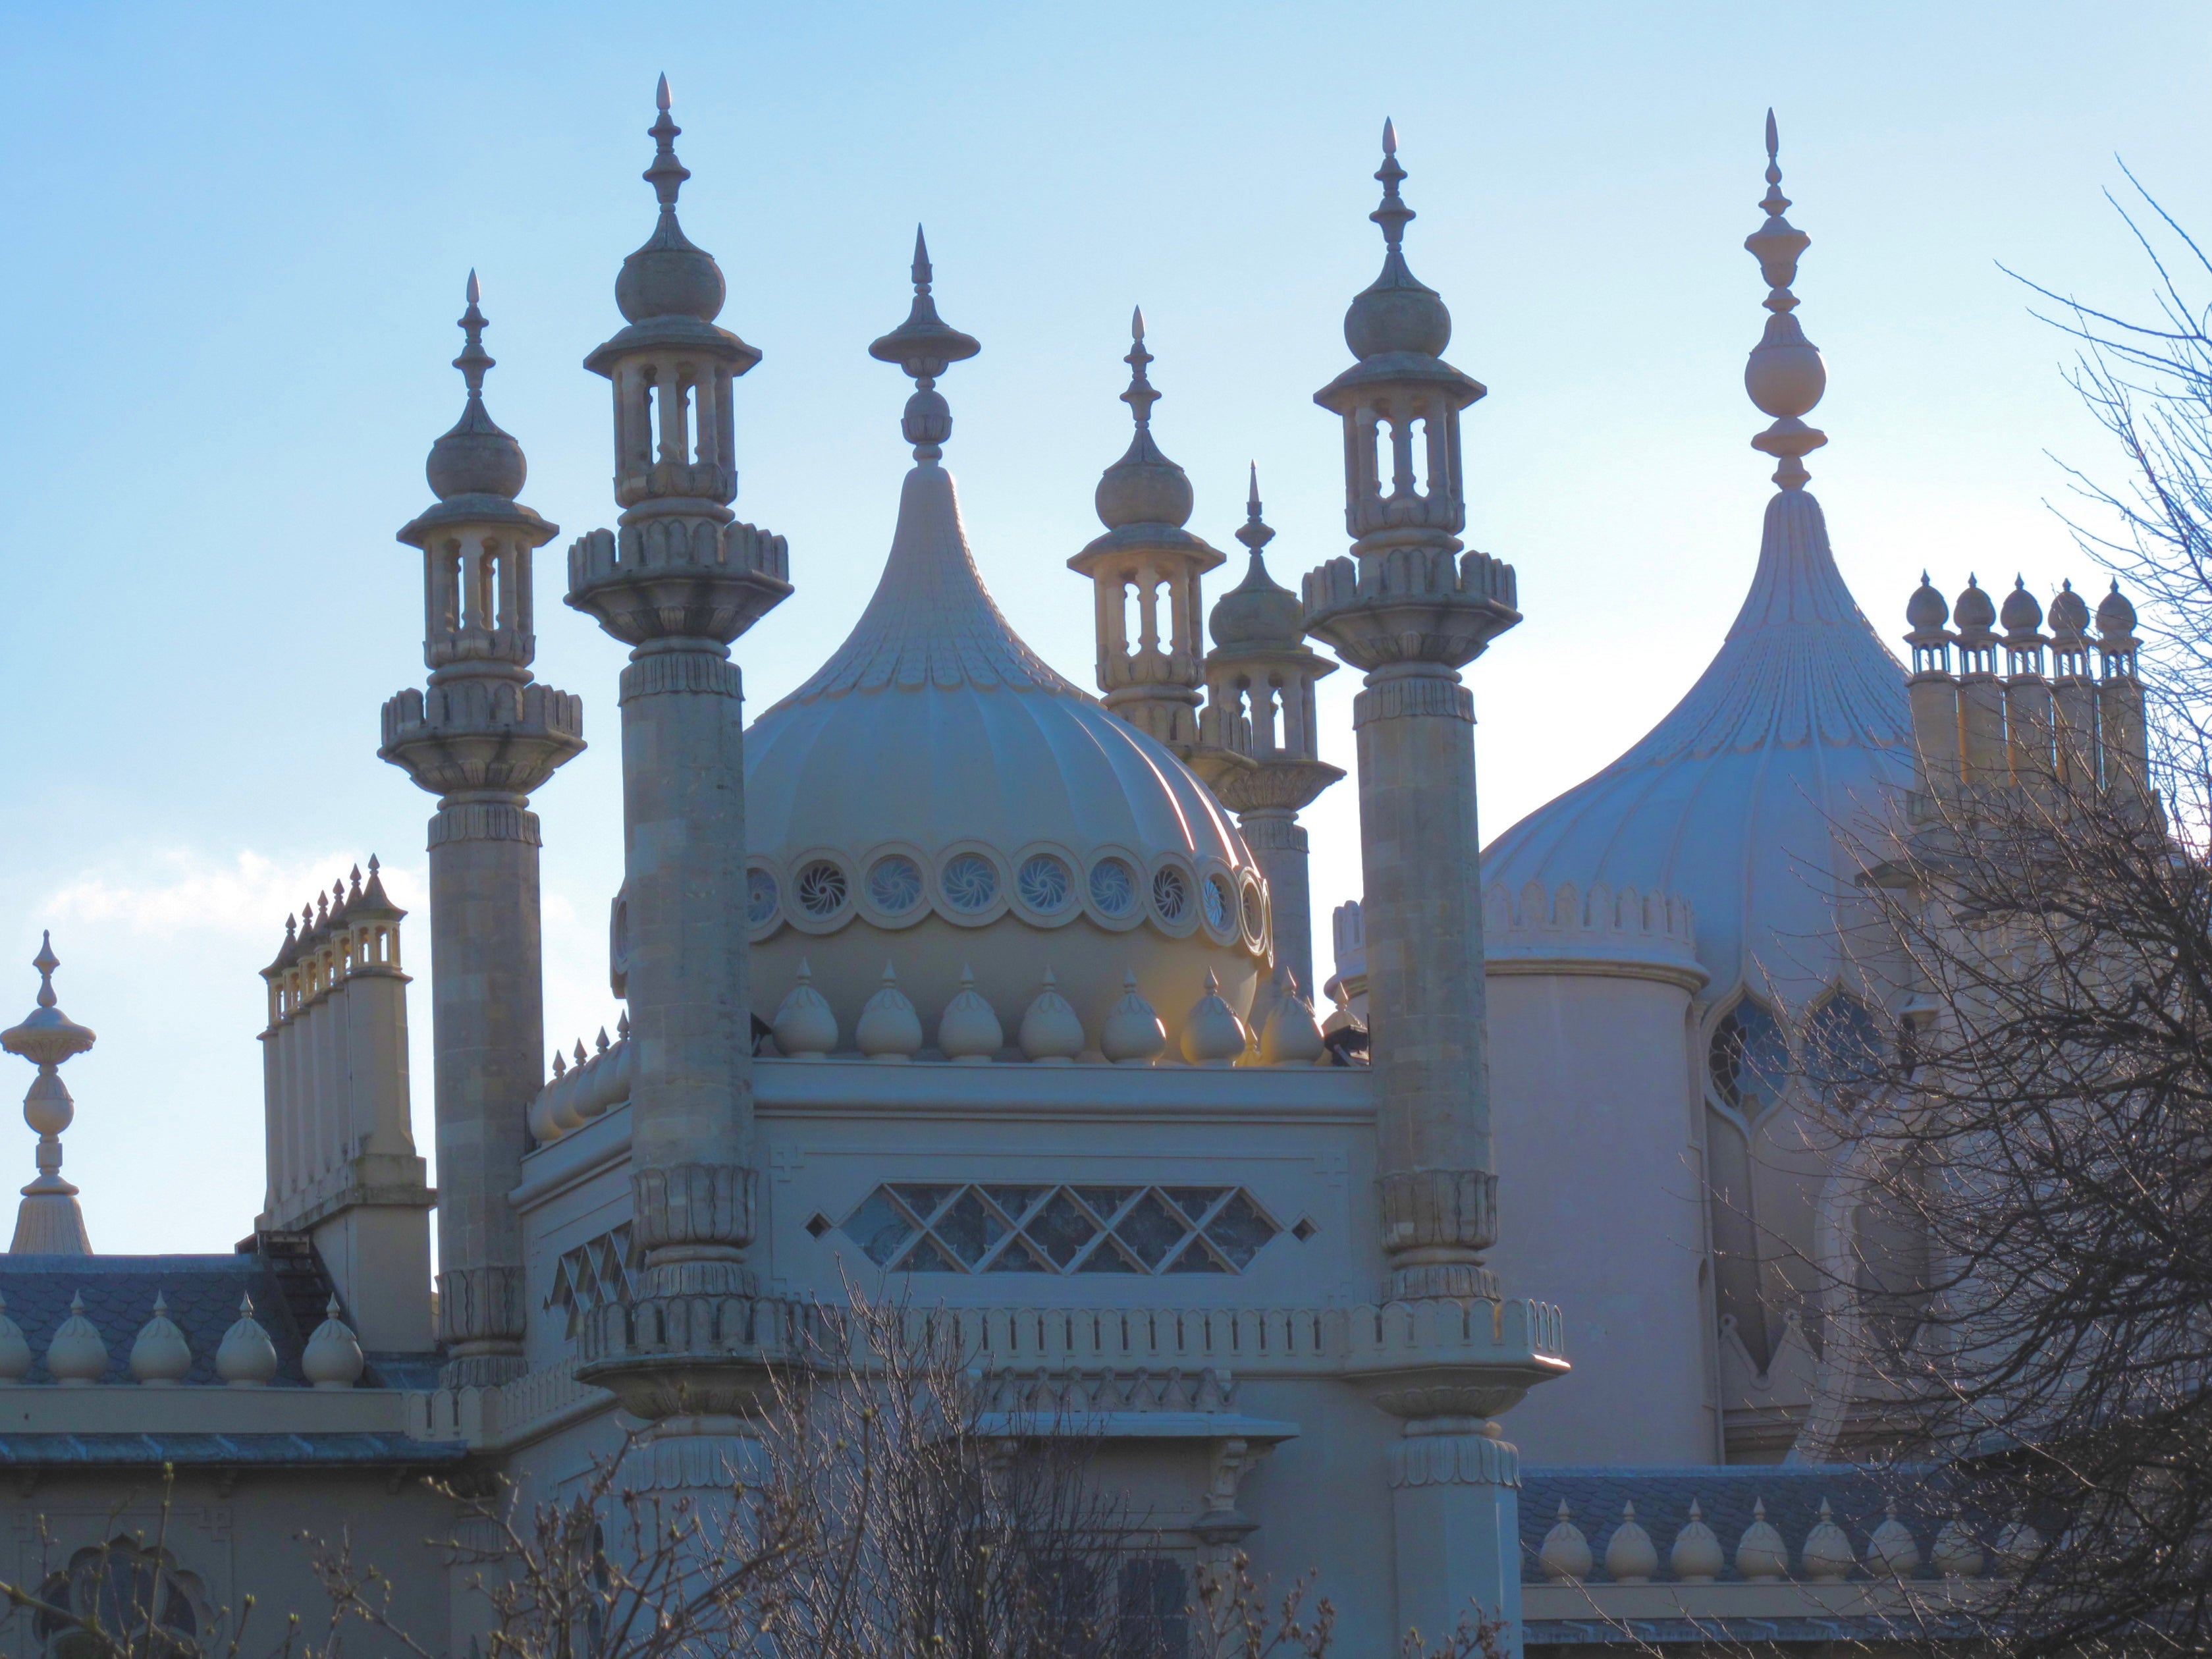 Bright start: Another clear day dawns over the Royal Pavilion in Brighton